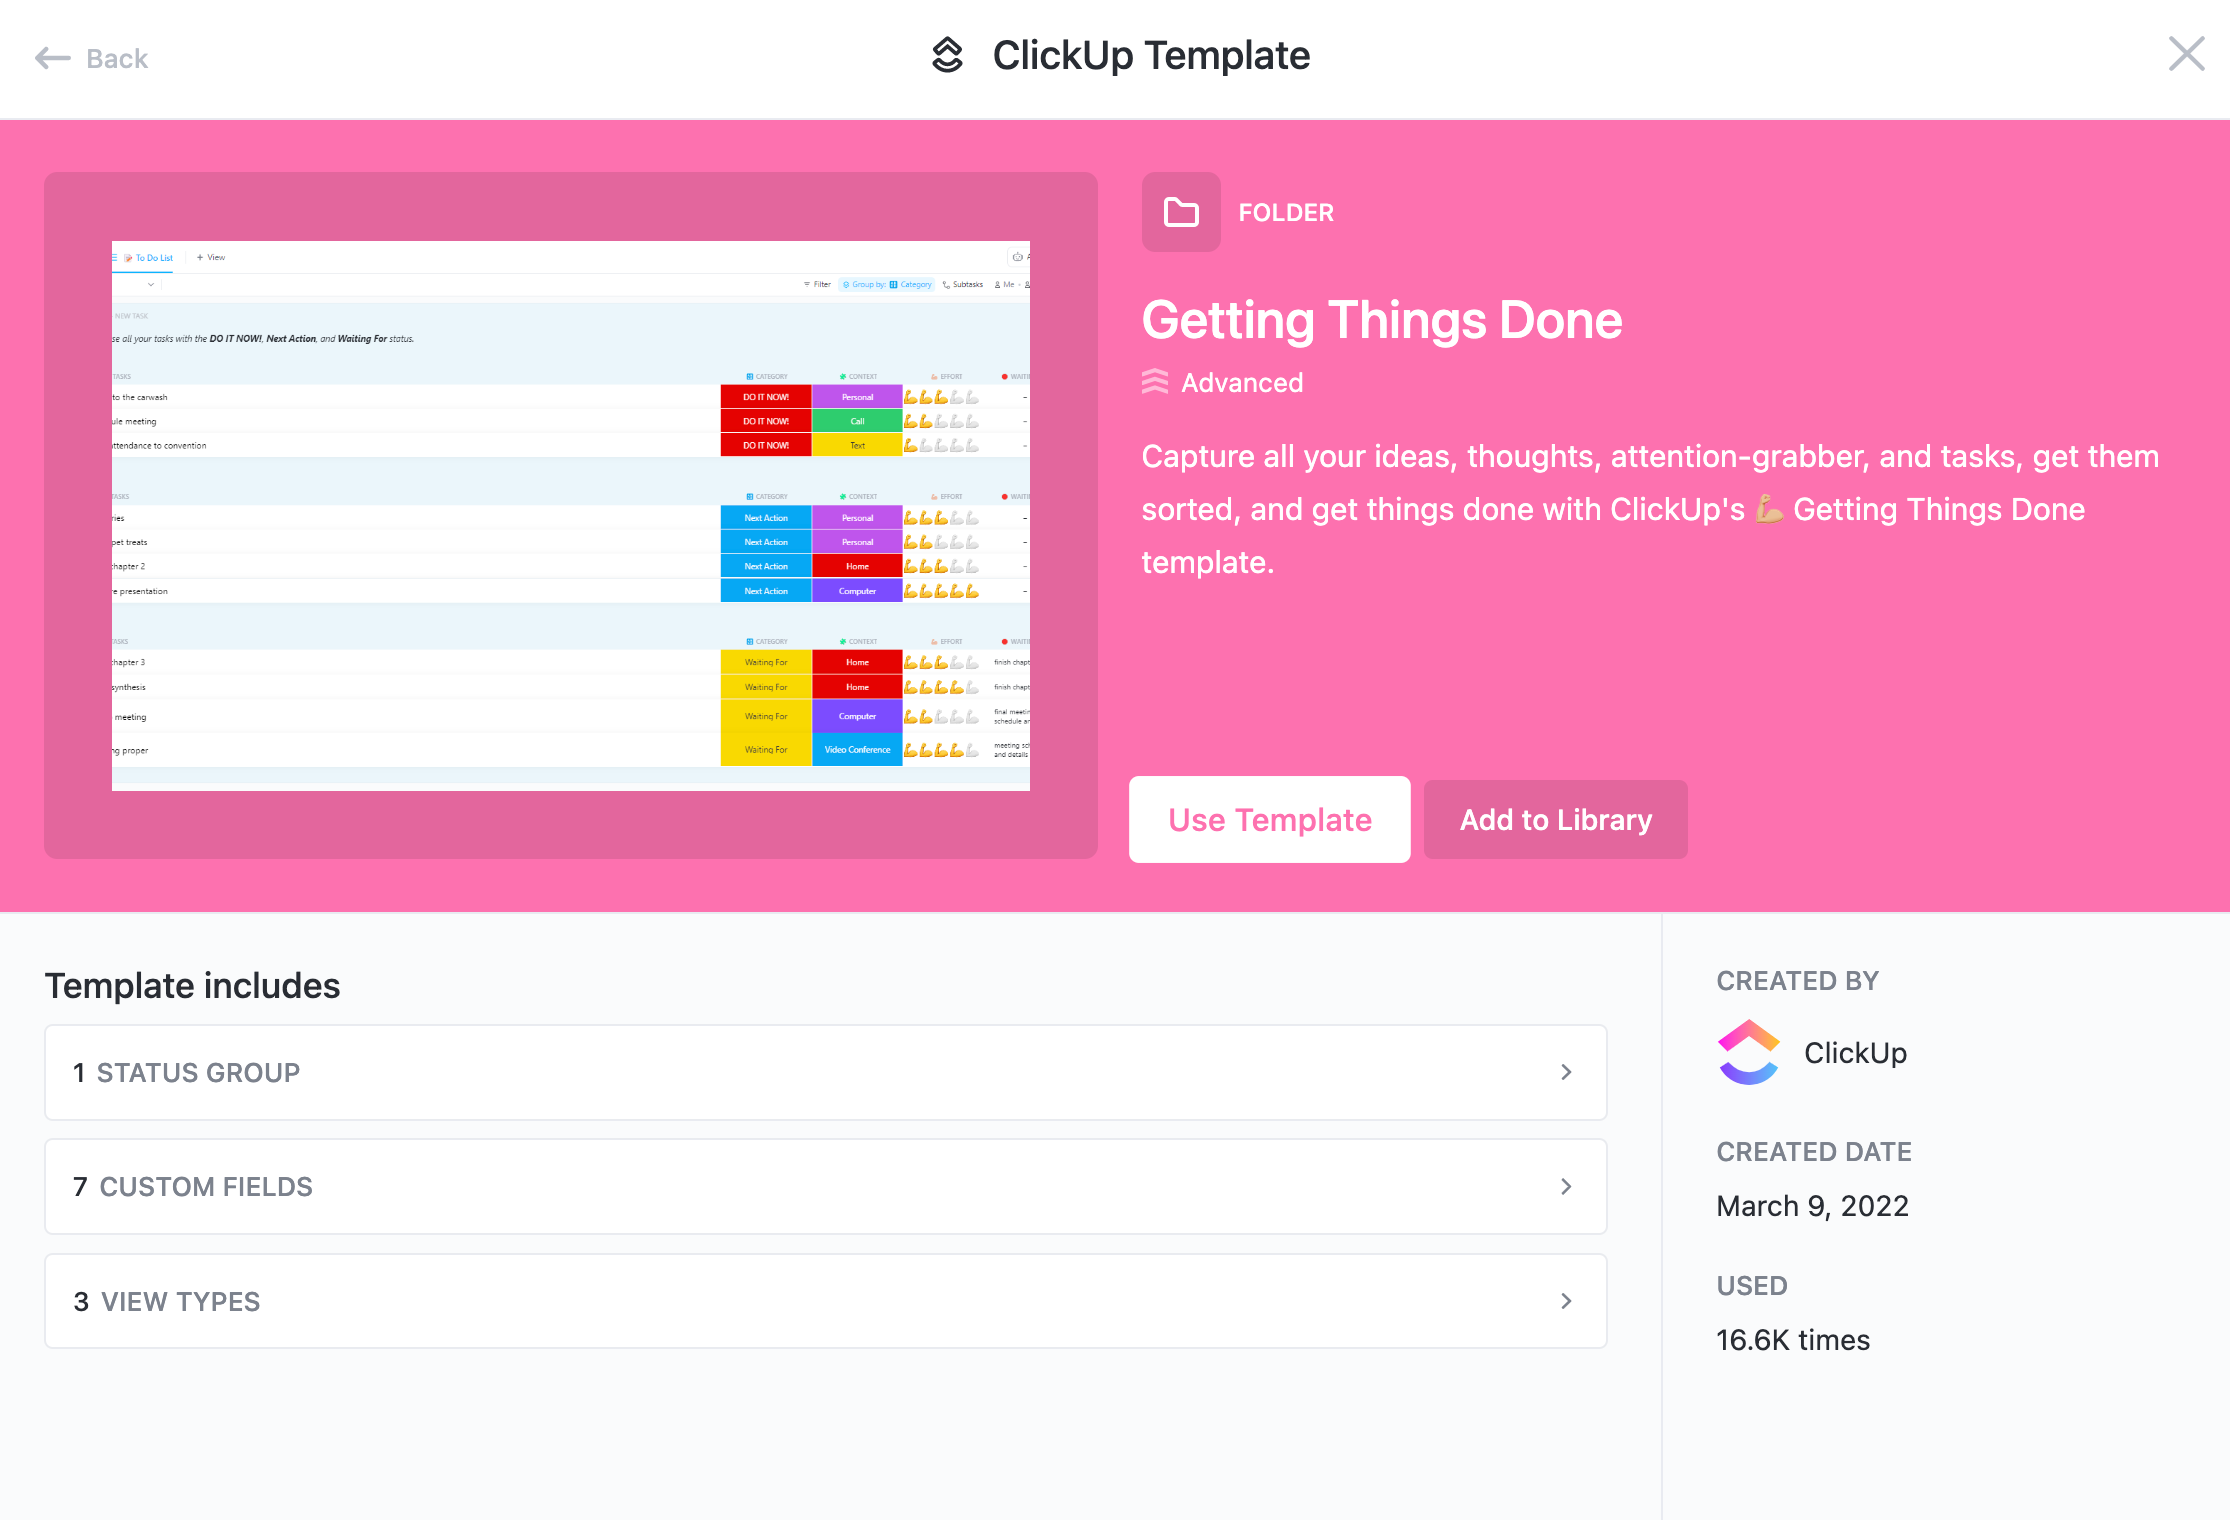 Screen shot of the Getting Things Done template in the ClickUp template center.